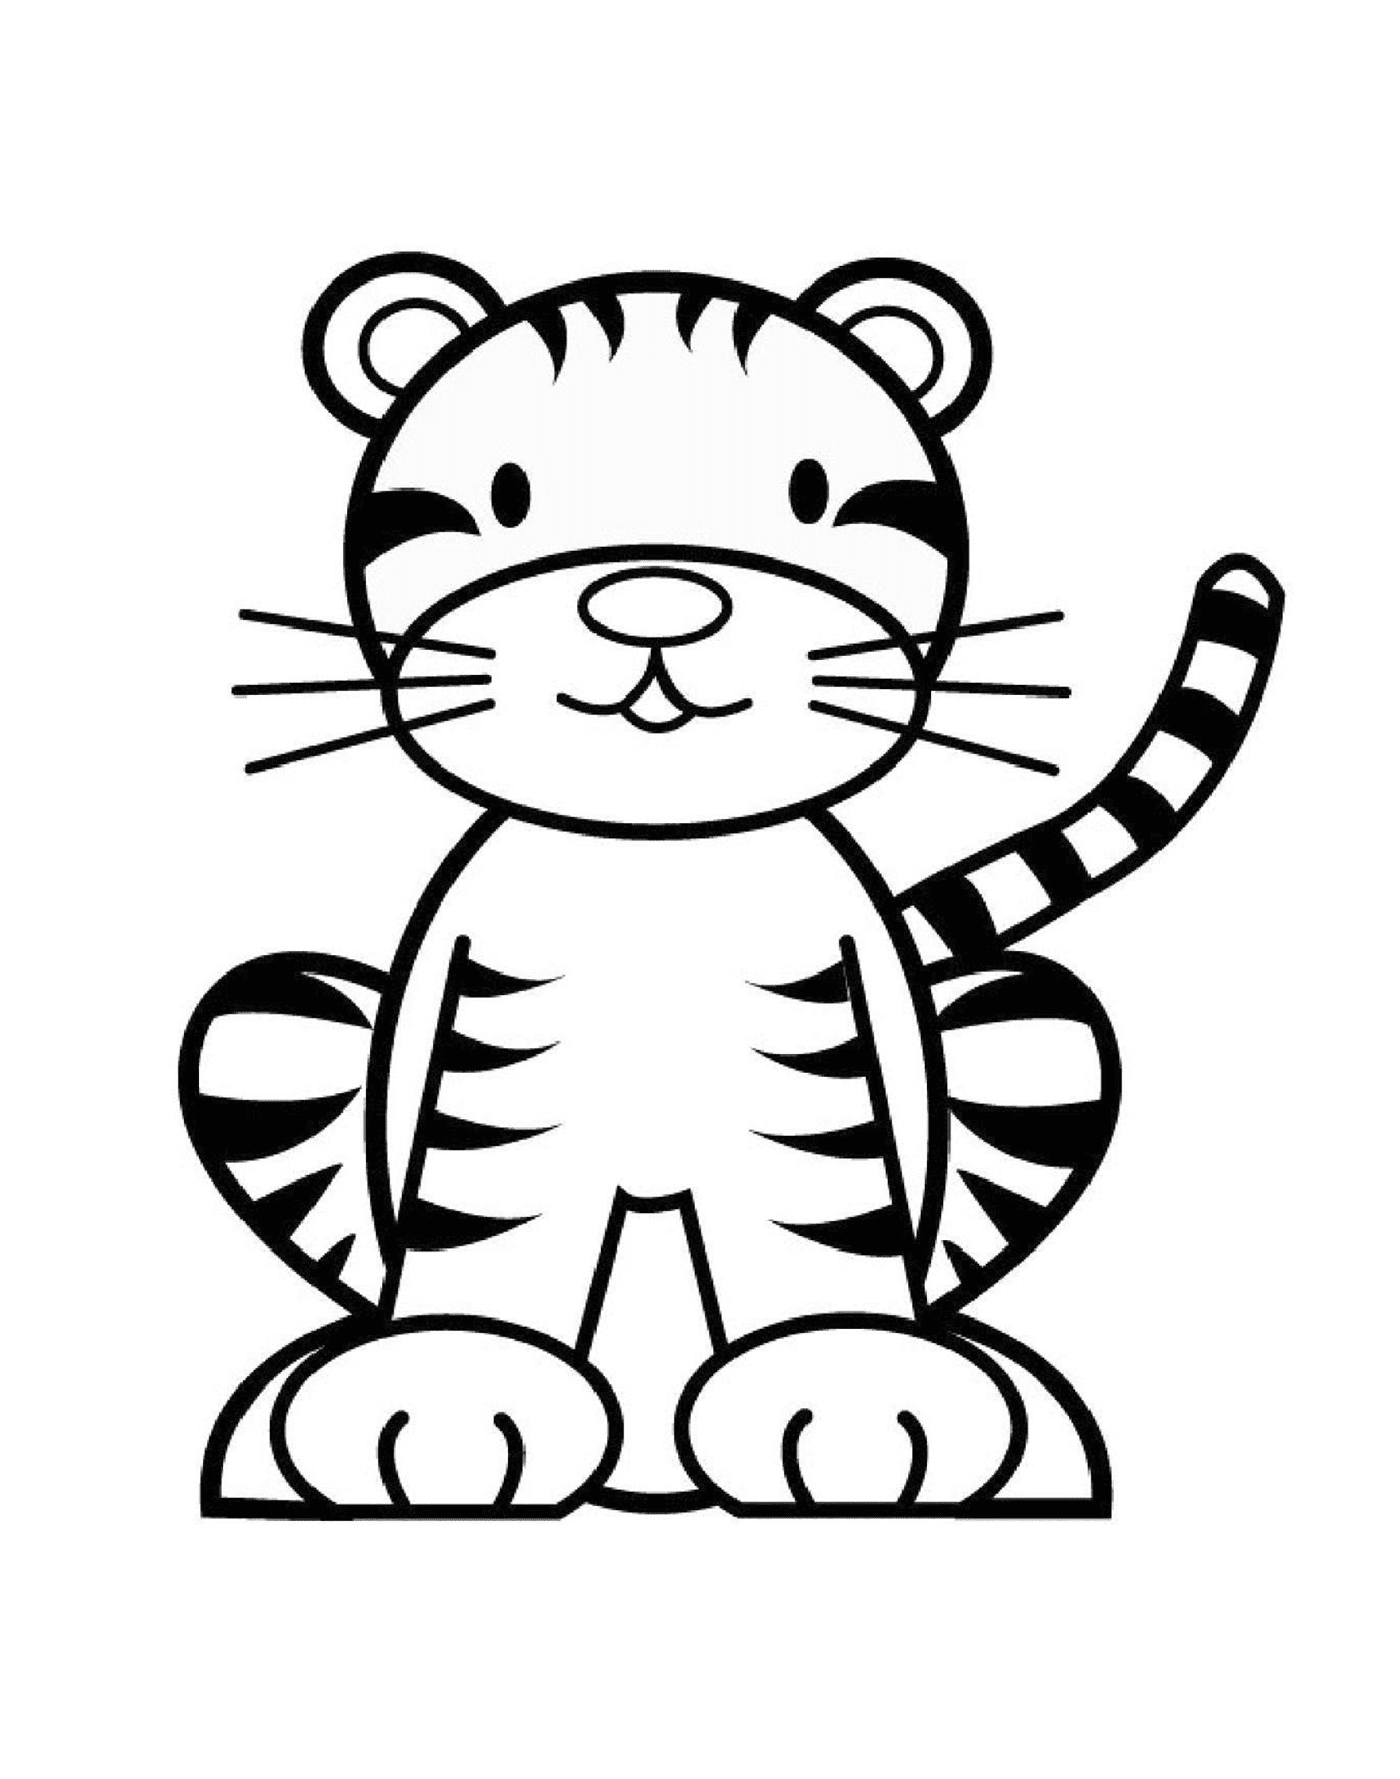  A simple tiger for children 